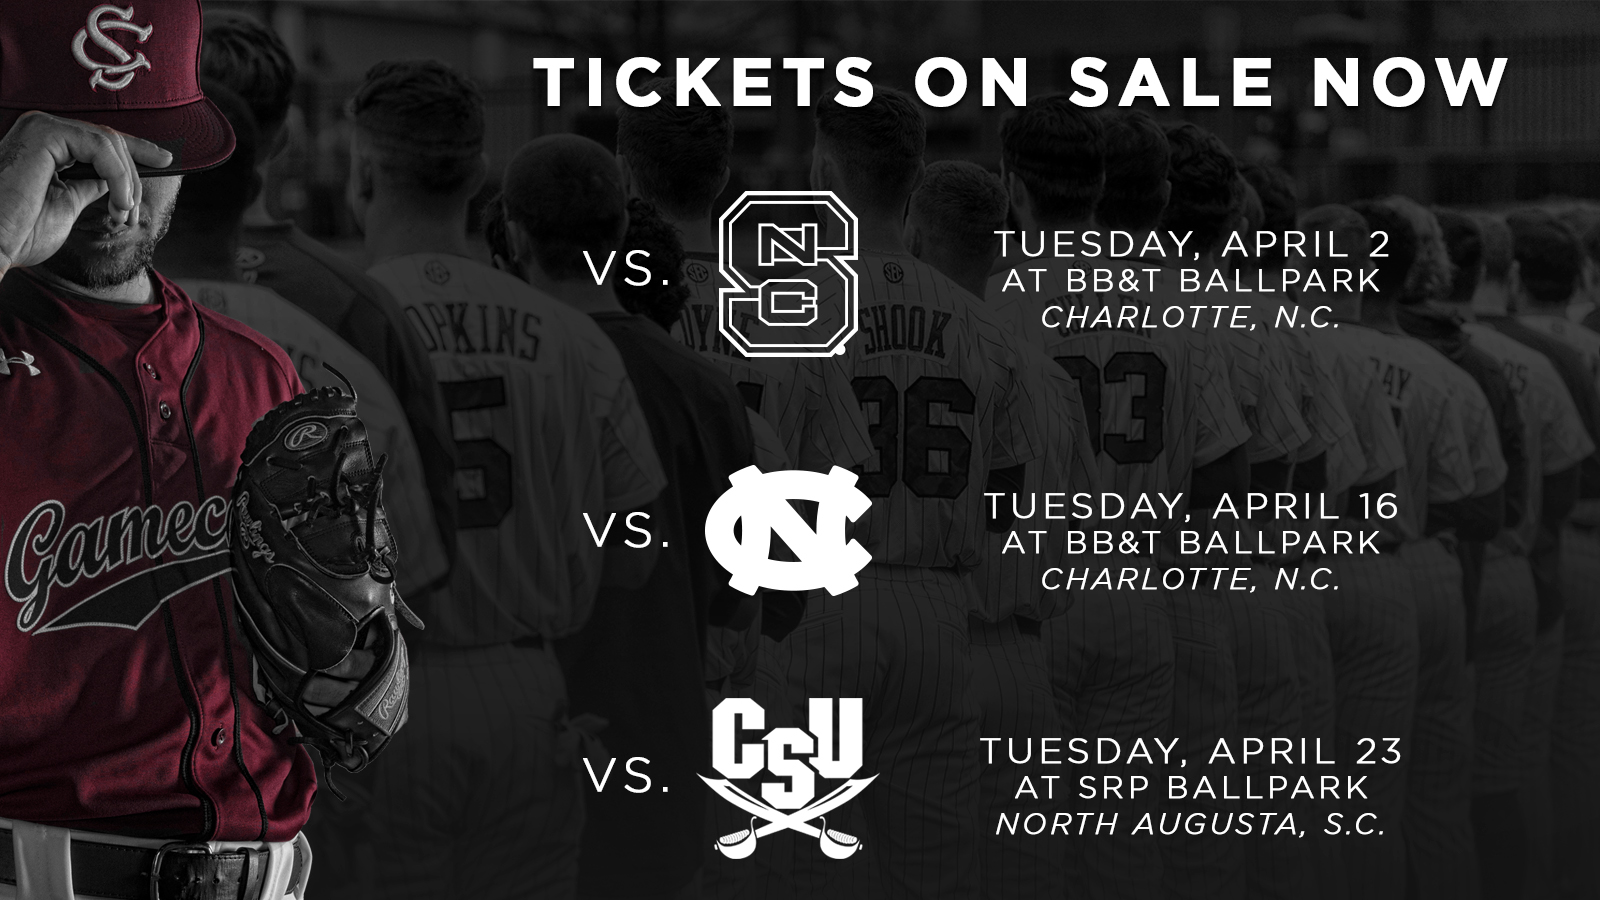 Baseball Neutral Site Tickets Now Available to General Public